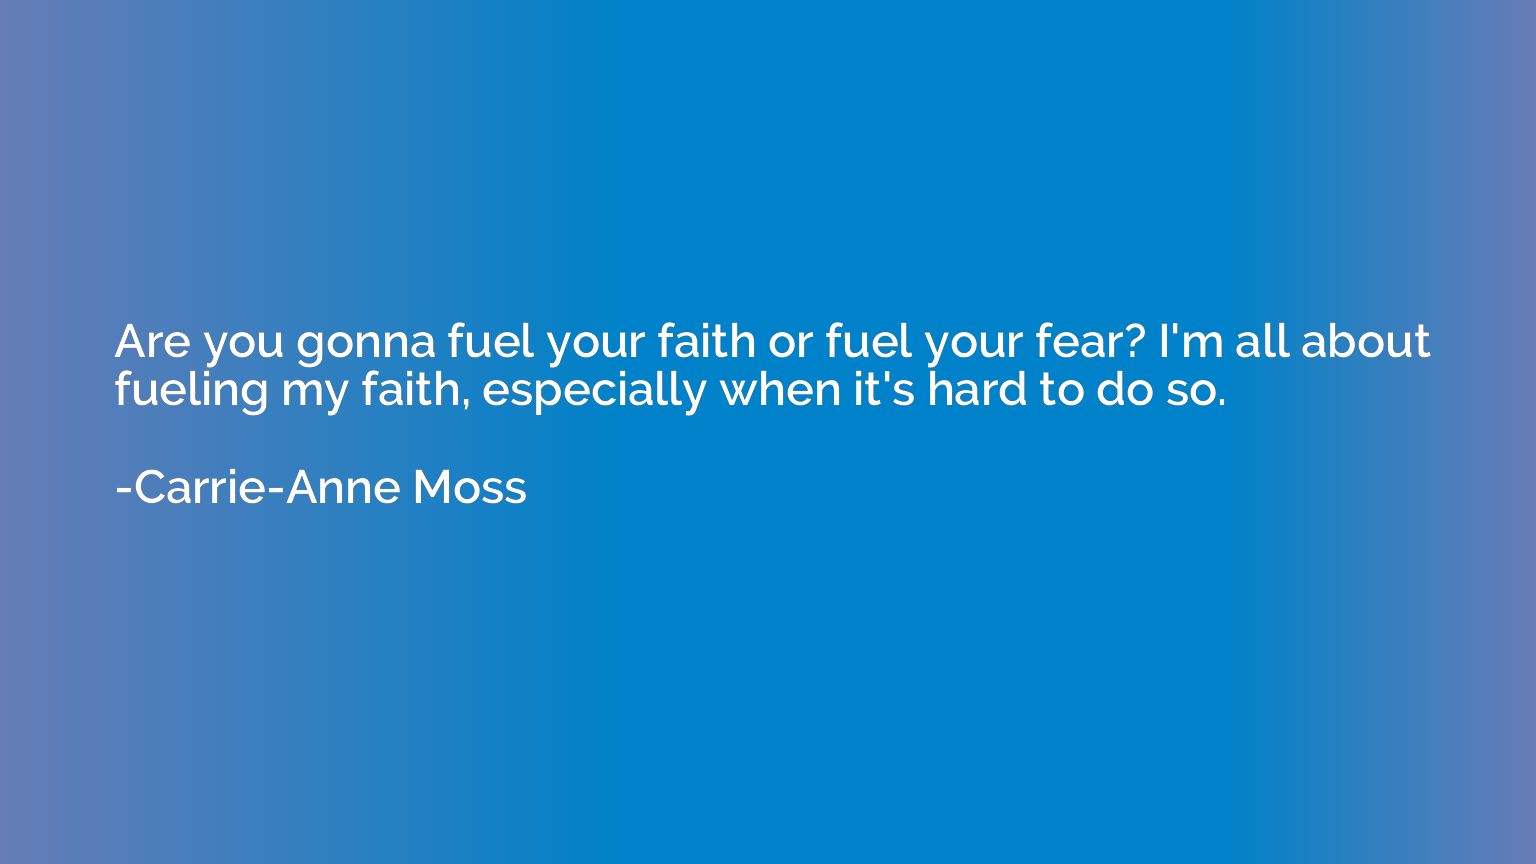 Are you gonna fuel your faith or fuel your fear? I'm all abo